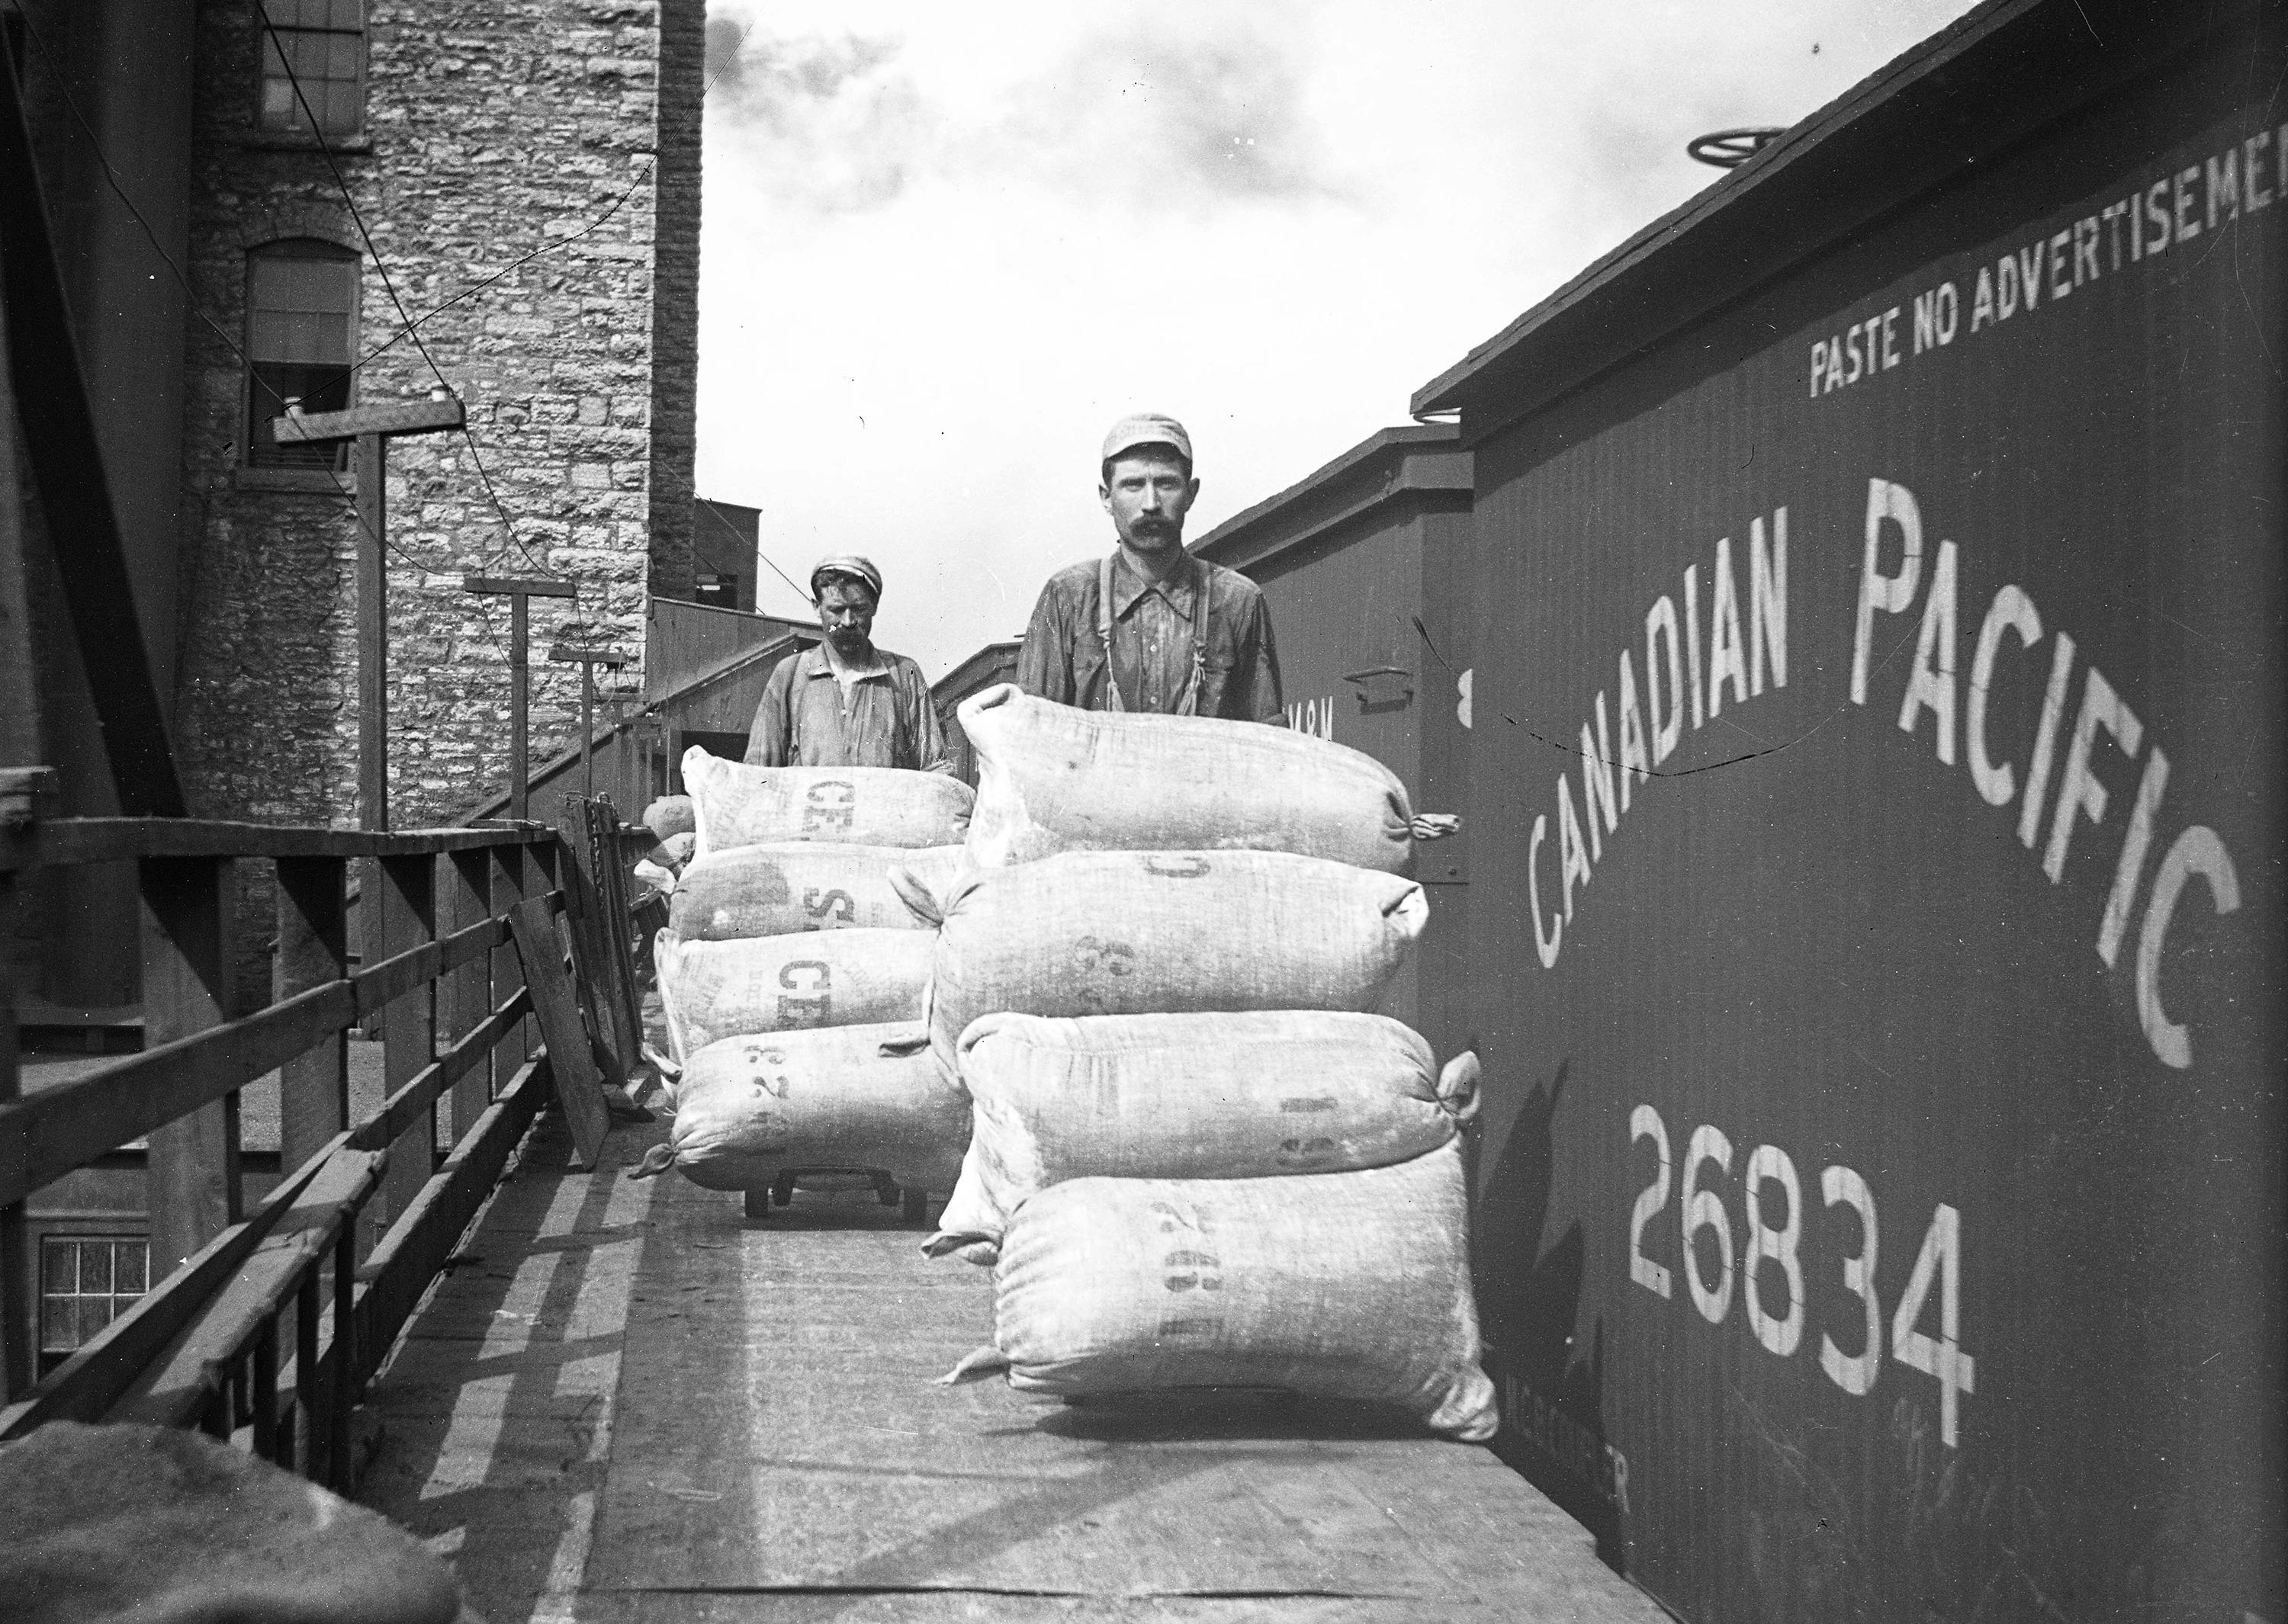 Workers load sacks of flour onto rail cars, likely around the turn of the century.